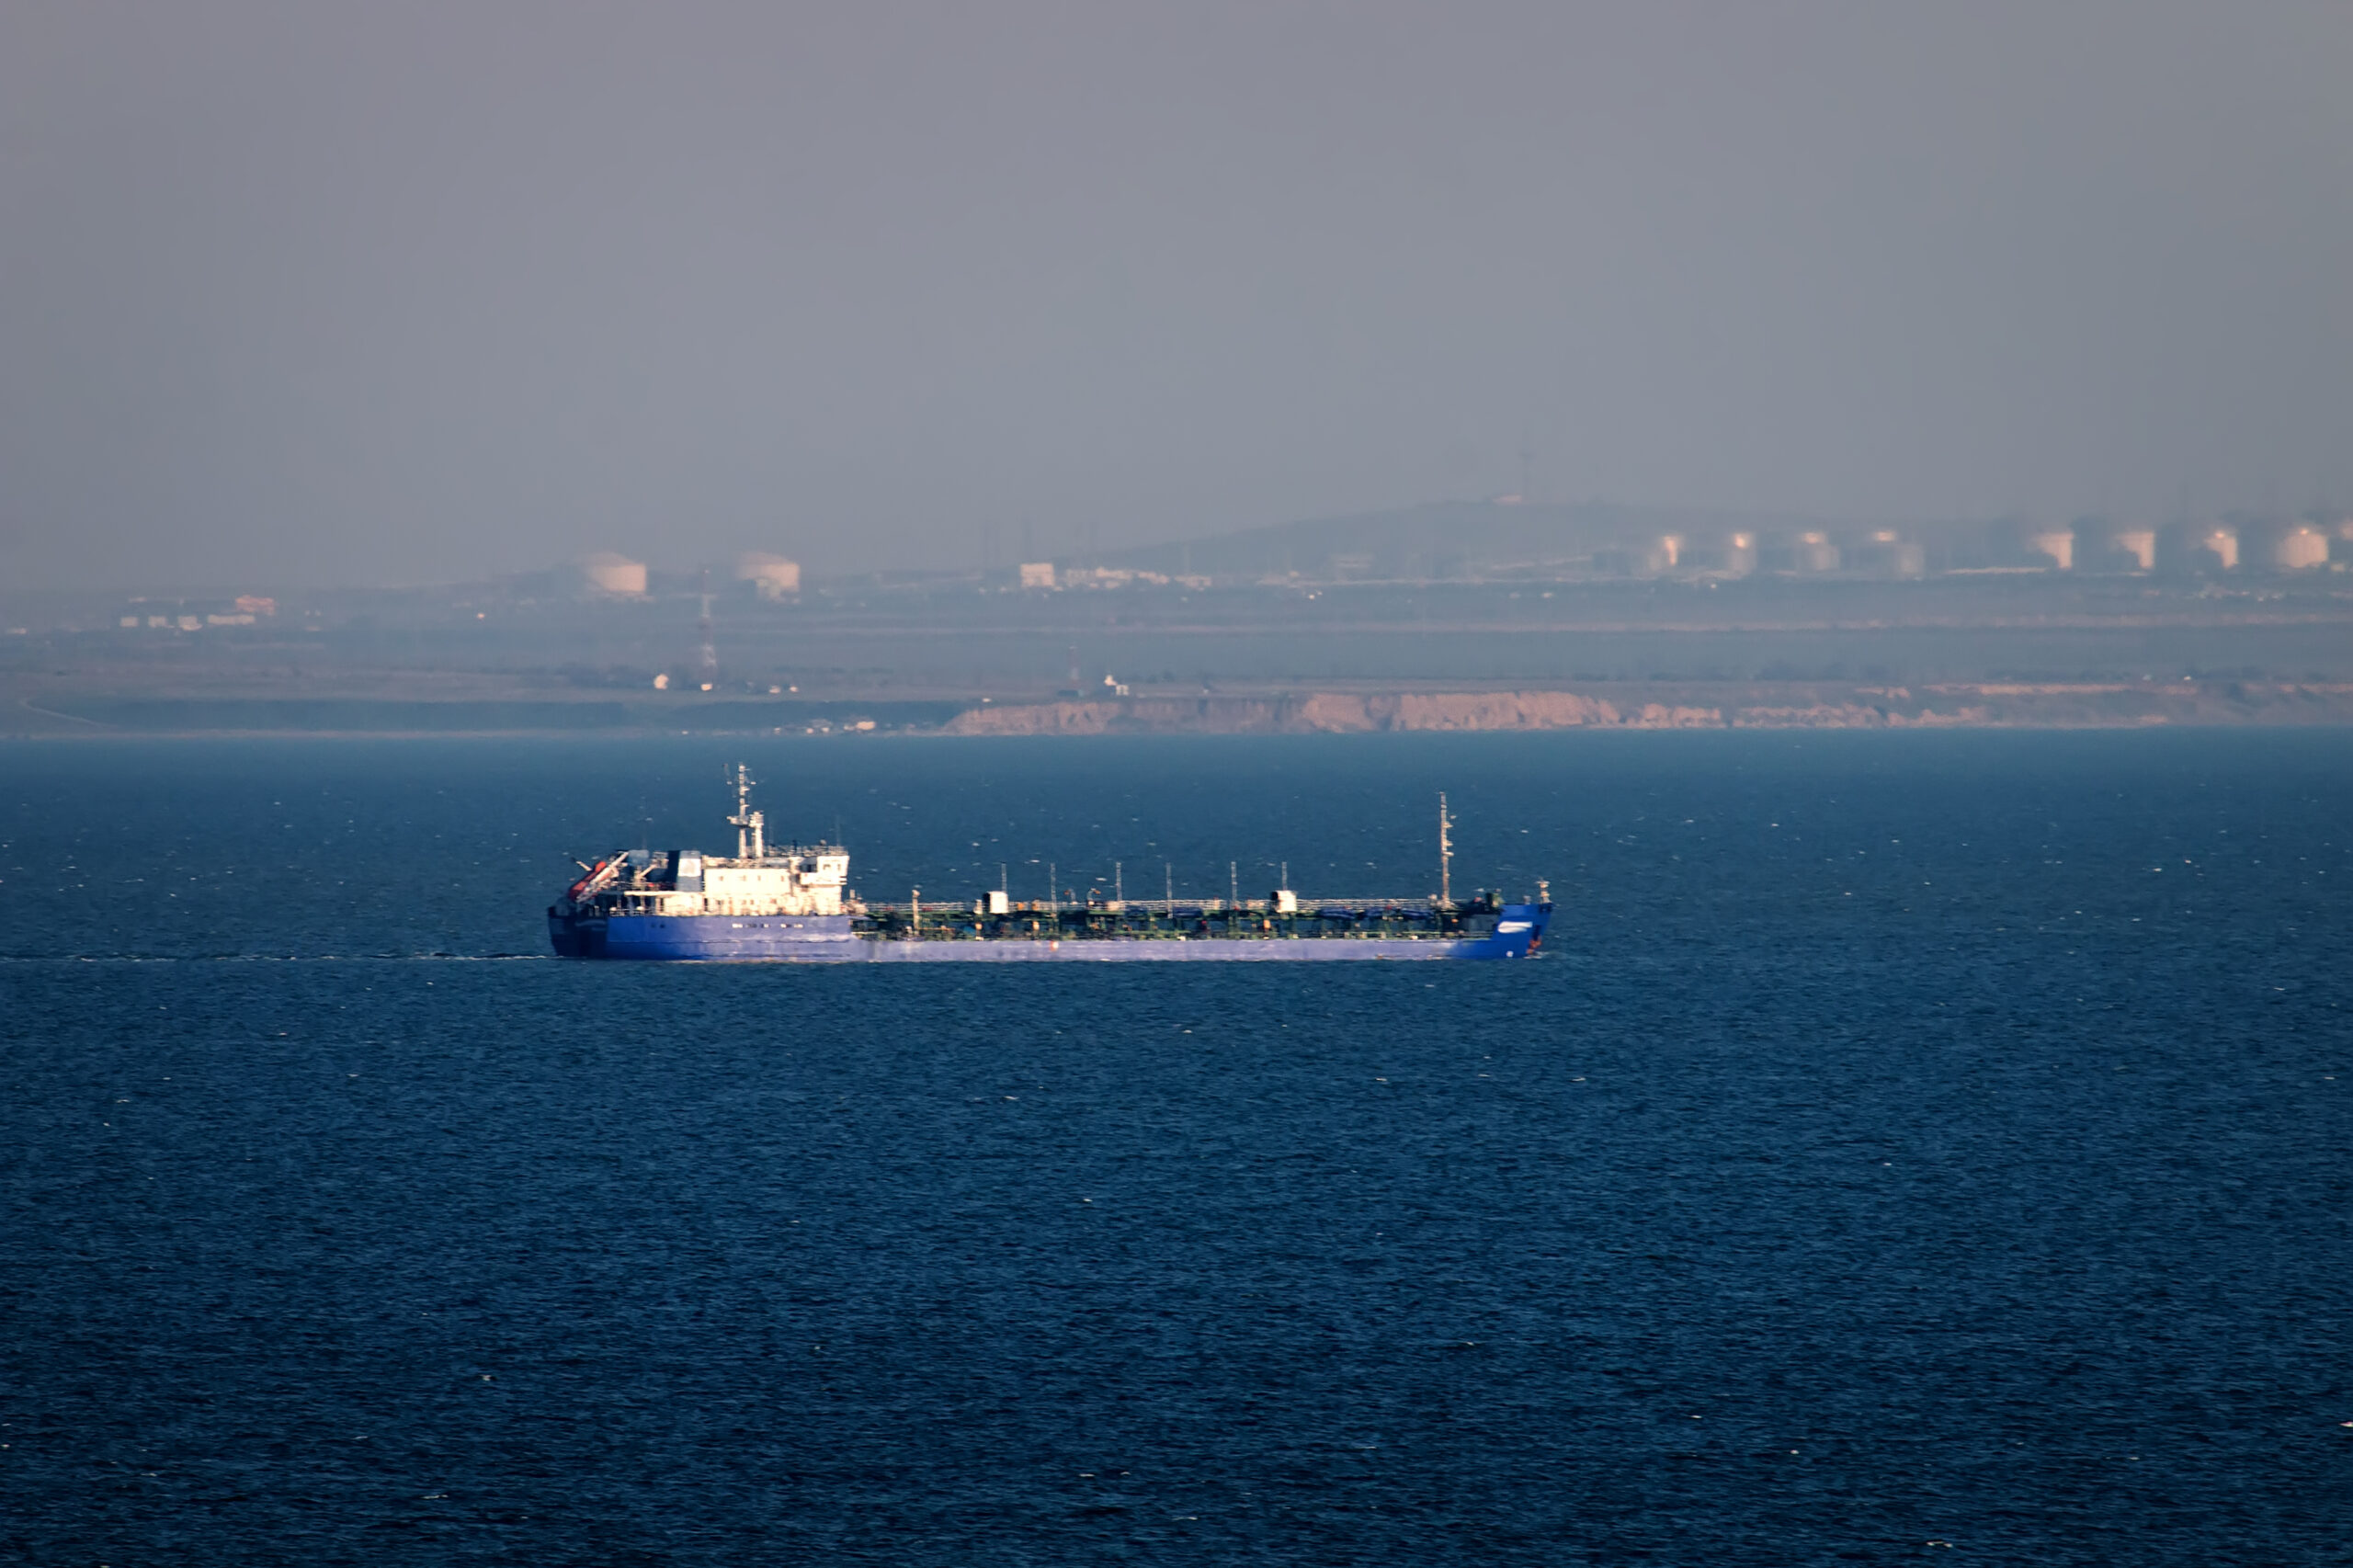 Shipping in Kerch Strait of Black sea of Azov sea. Oil tanker river-sea and huge tanks with fuel on shore Taman, ship traffic, cabotage. Marine transportation of petroleum products, oil terminal